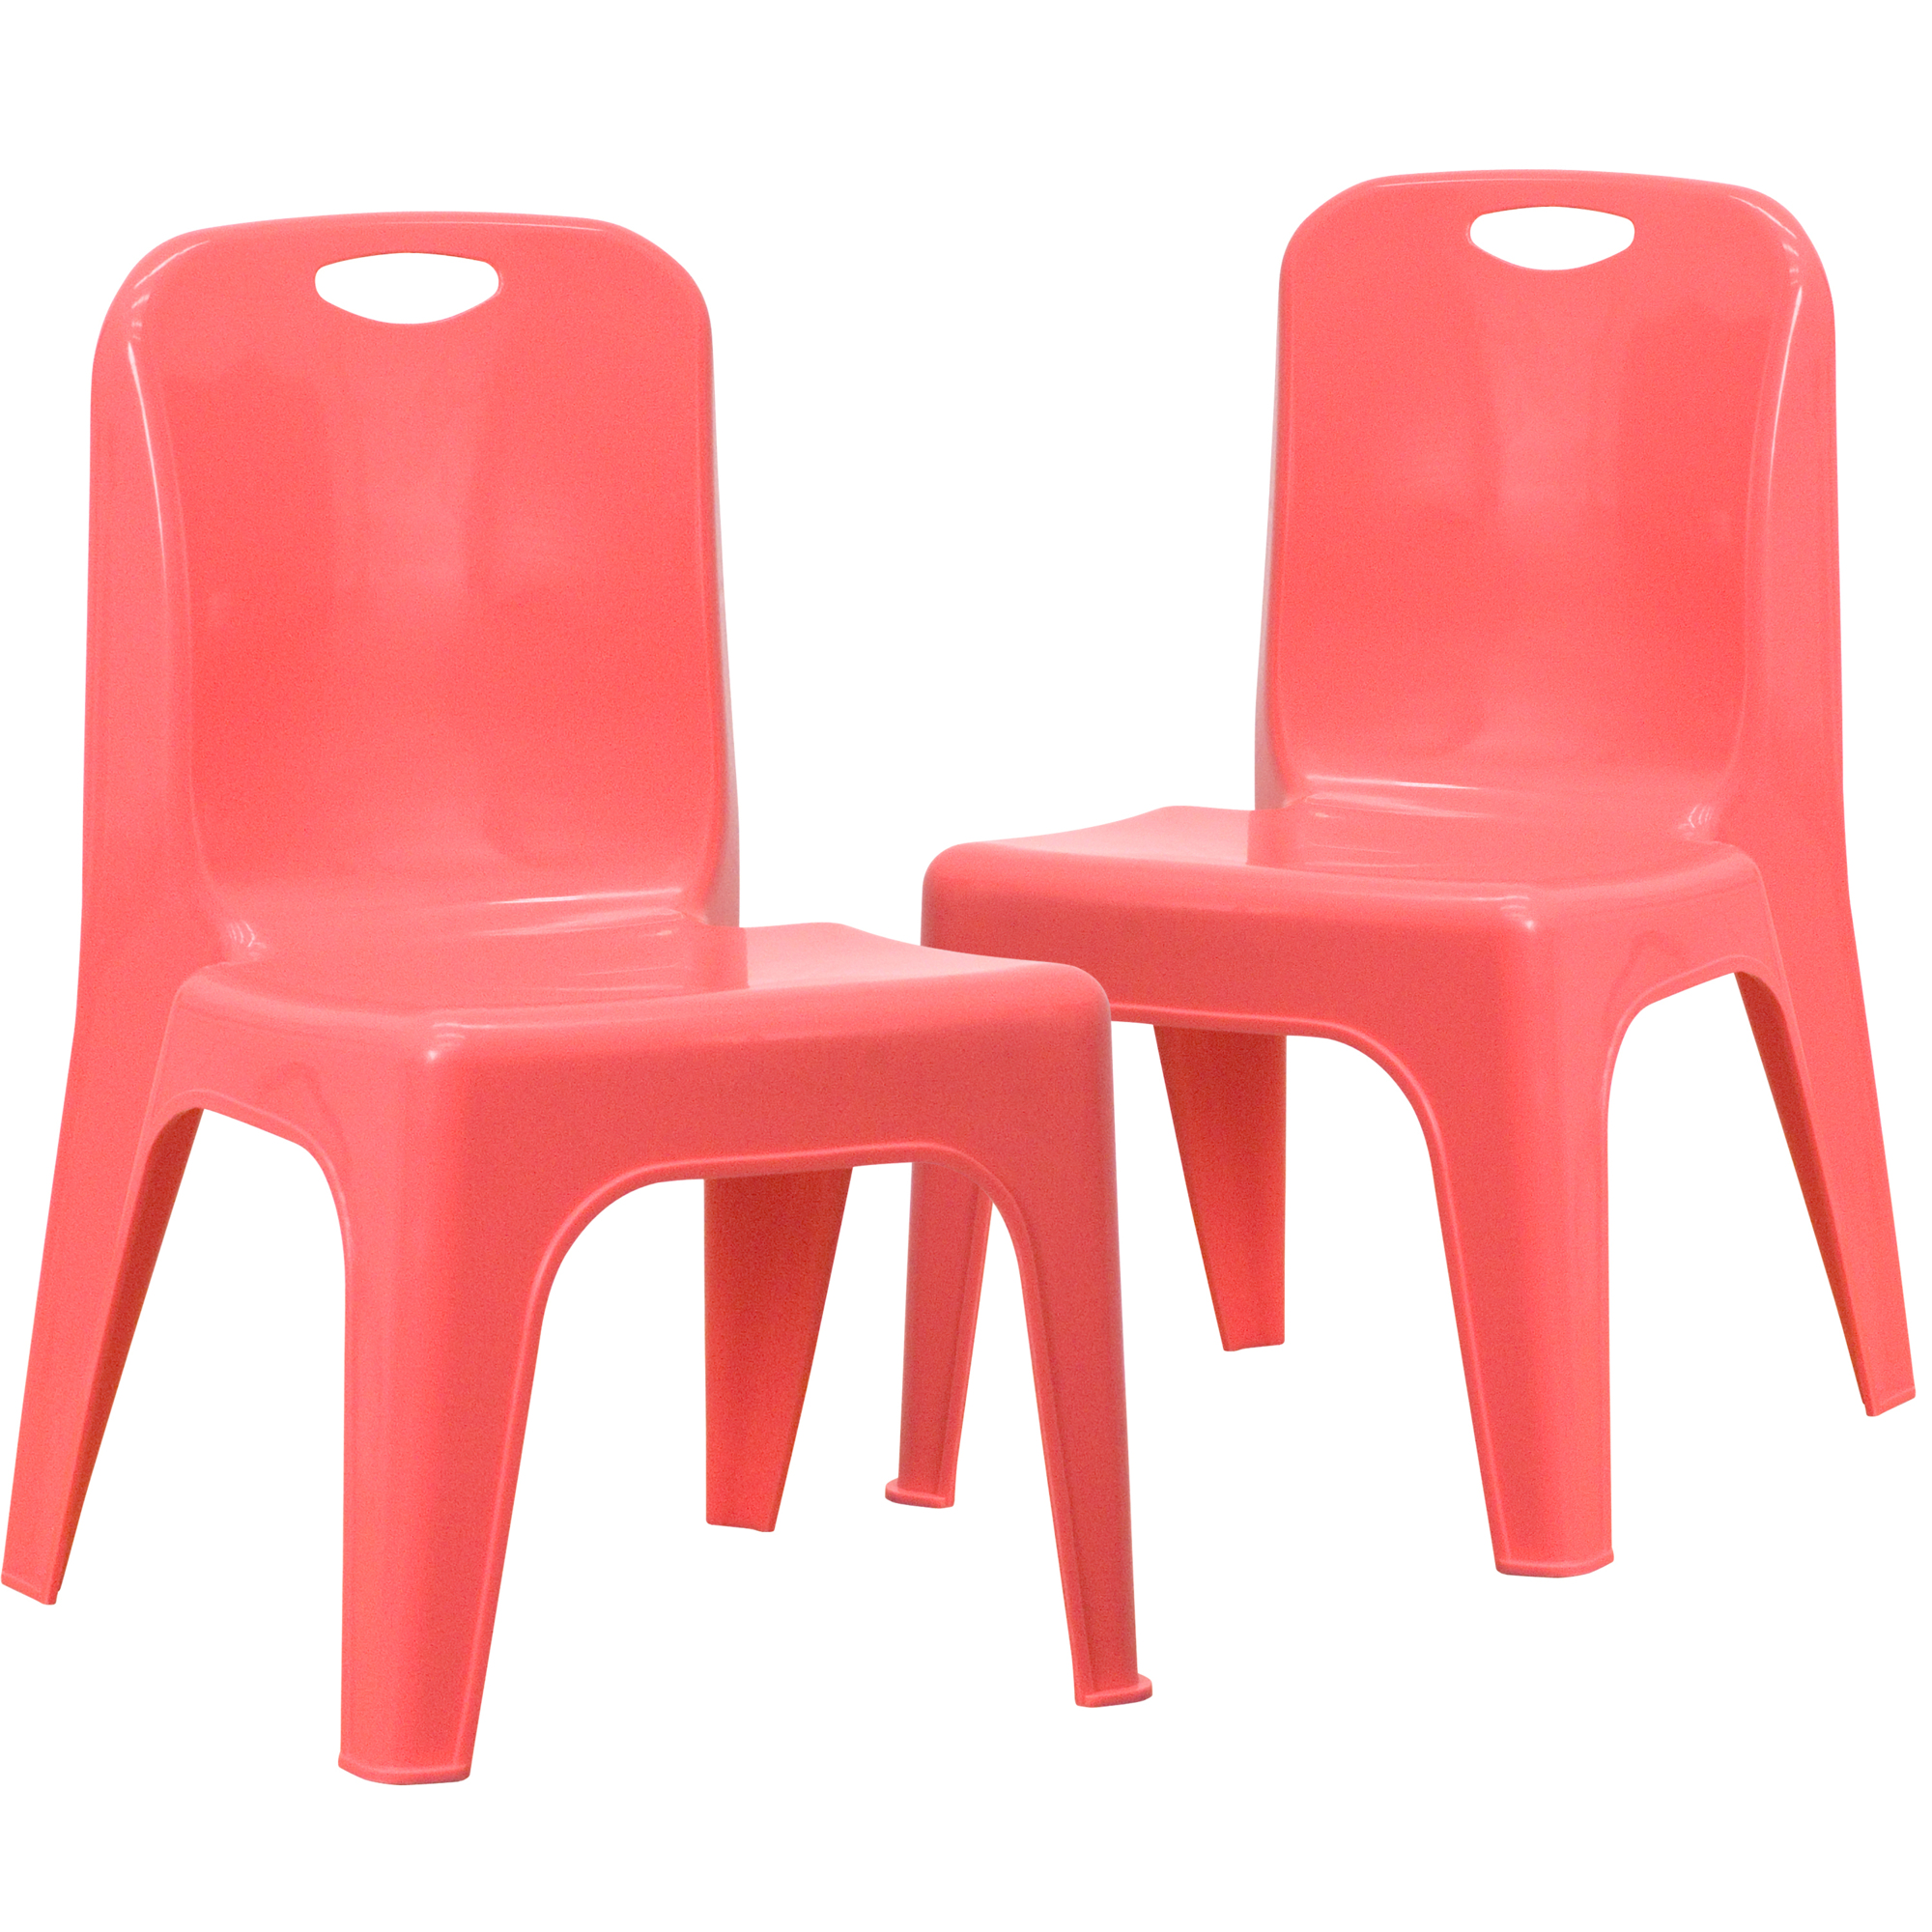 Flash Furniture, 2 Pack Red Plastic Stack School Chair-11Inch H Seat, Primary Color Red, Included (qty.) 2, Model 2YUYCX011RED